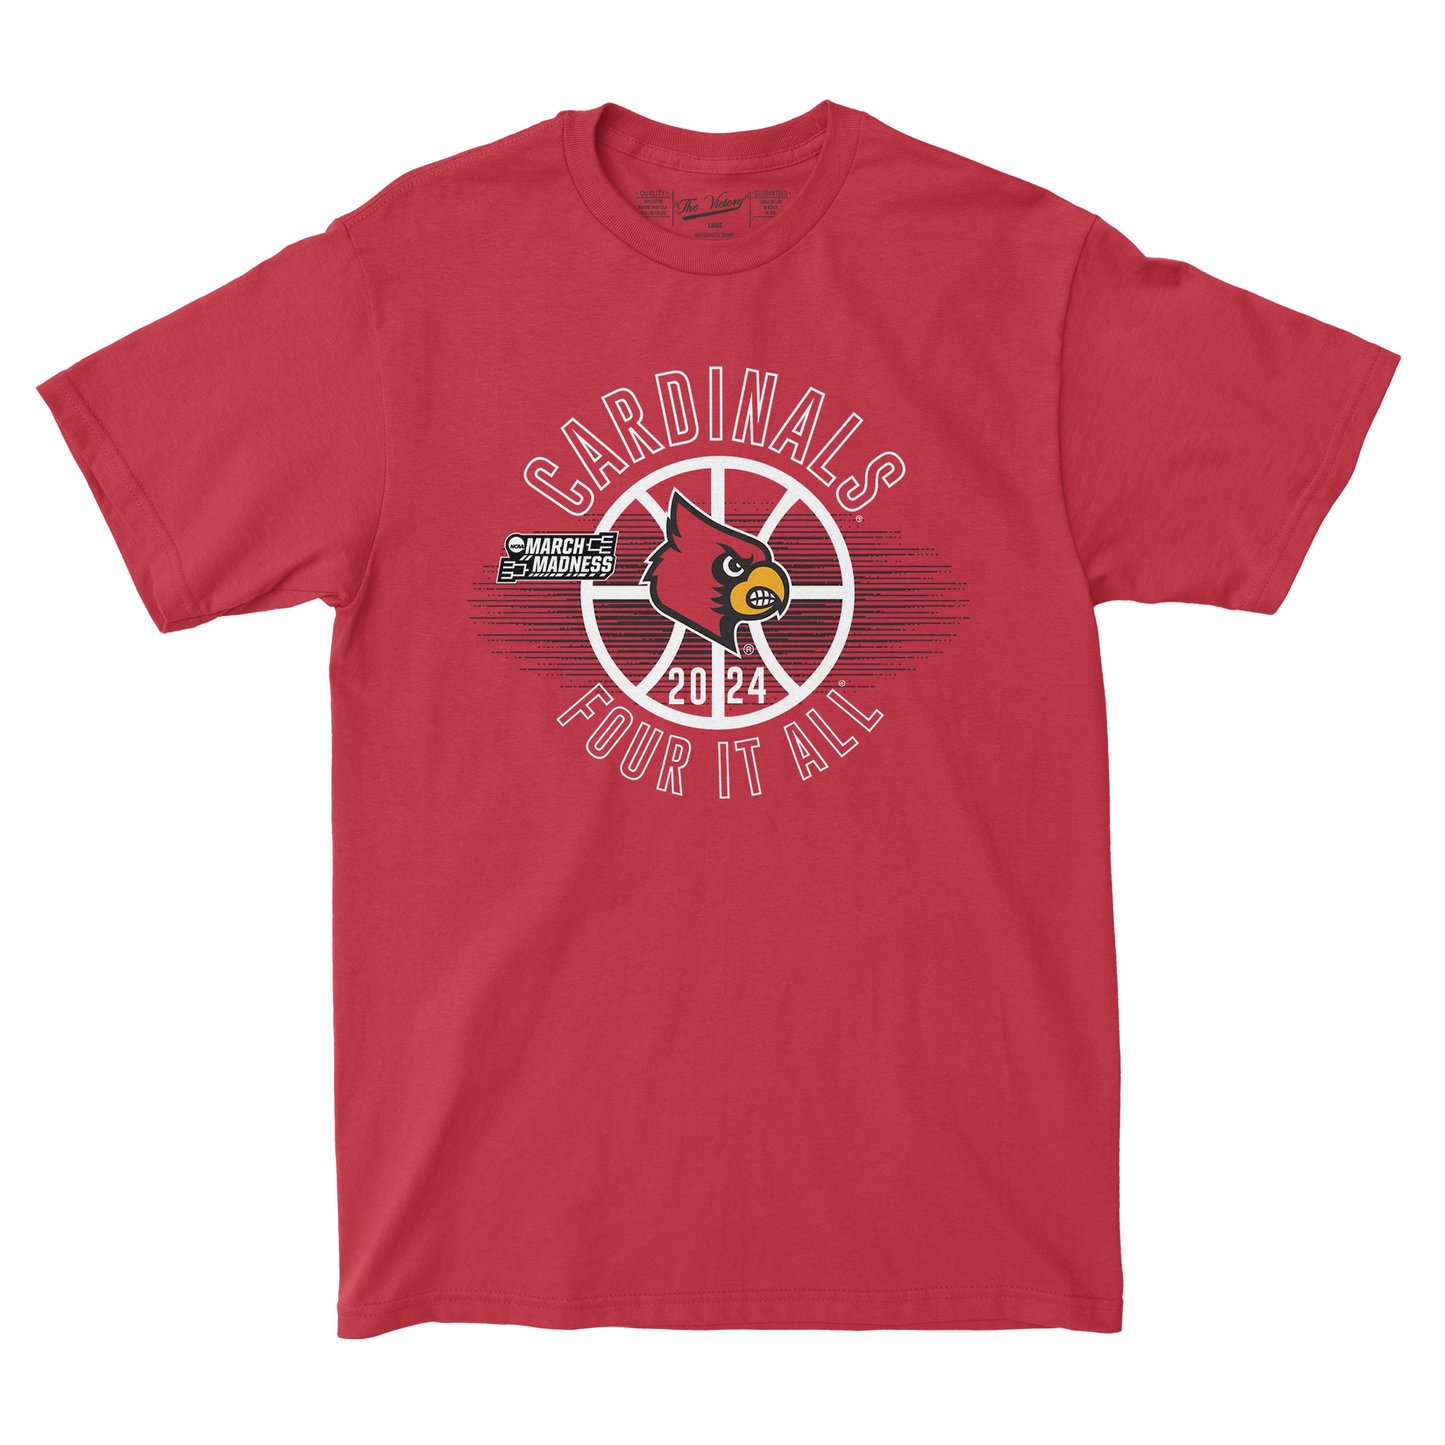 Louisville WBB Four it all T-shirt by Retro Brand